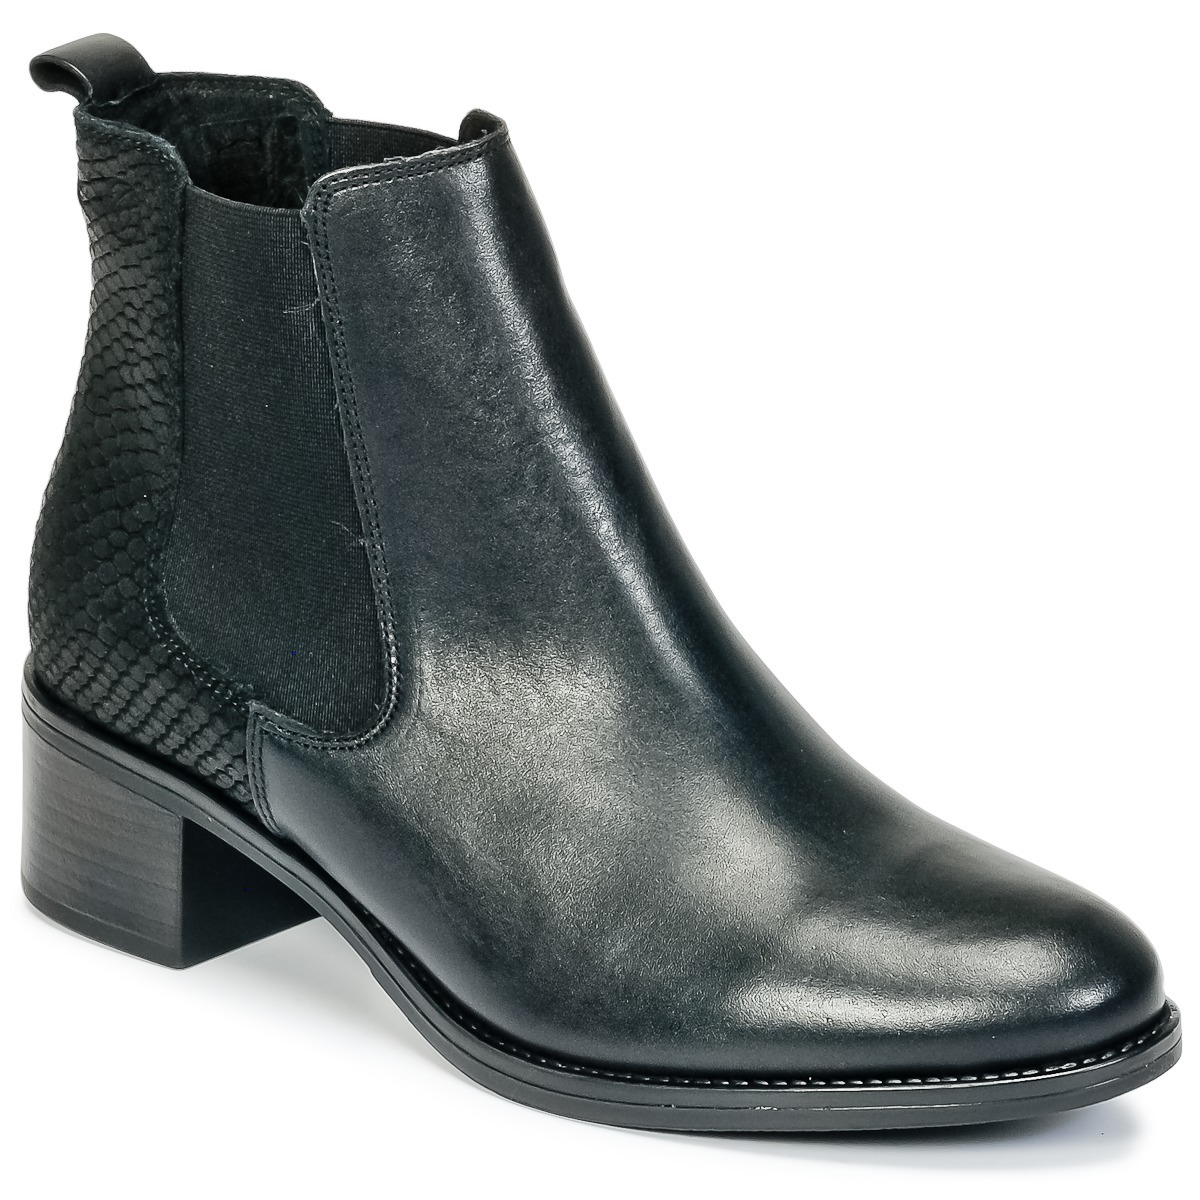 Spartoo - Ankle Boots in Black Betty London Woman GOOFASH